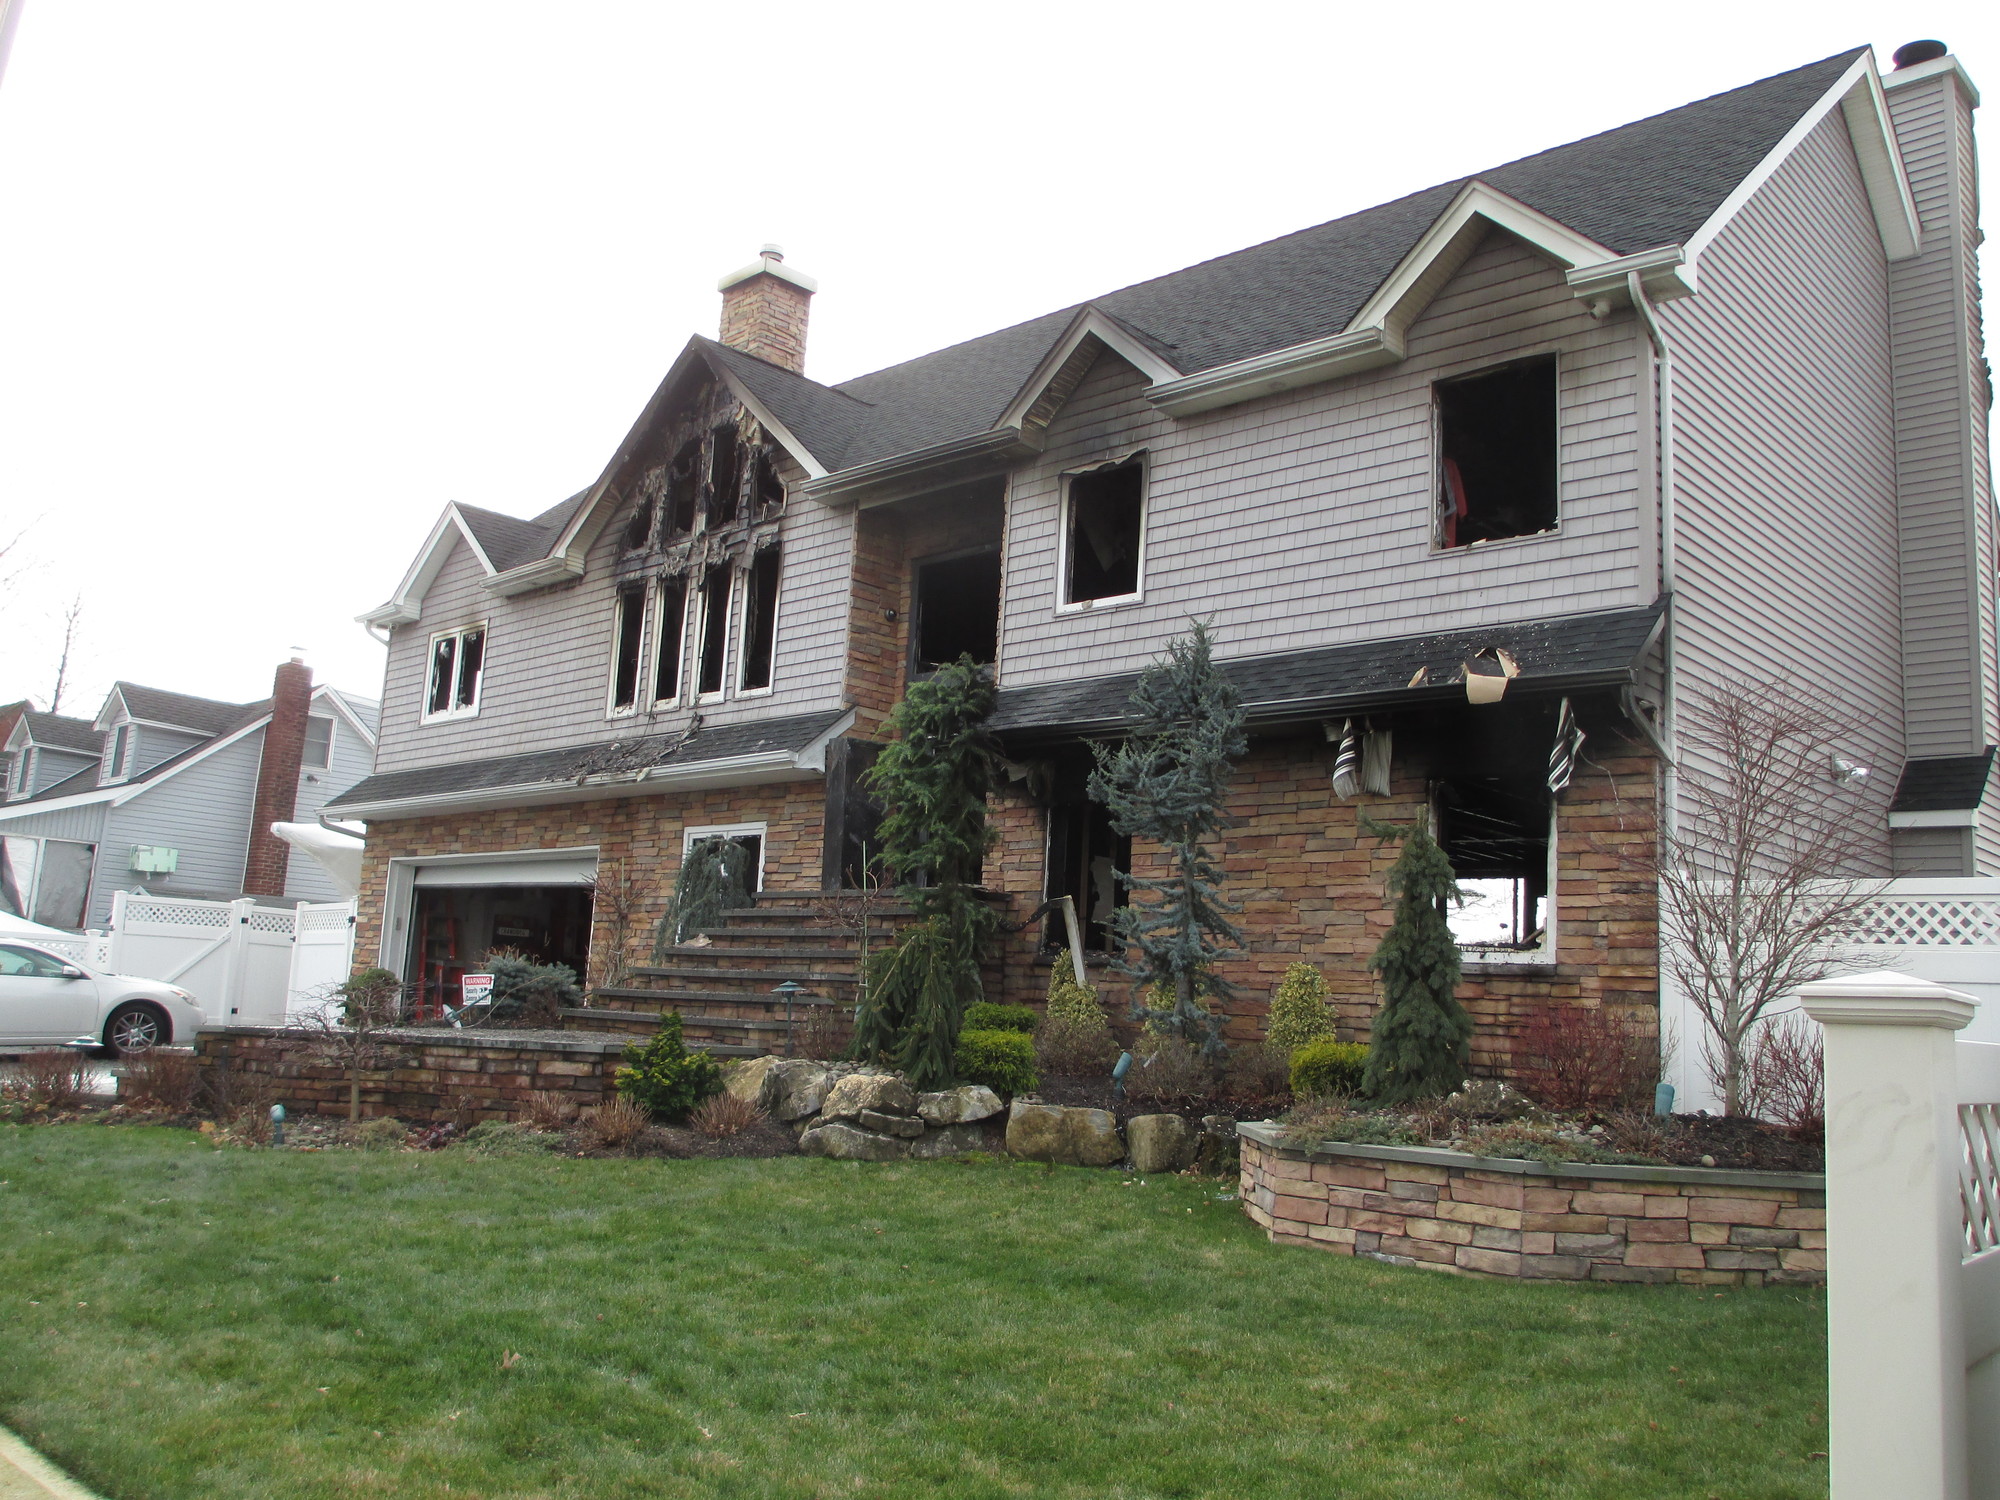 The house at 3372 Gintell Street after the fire was extinguished.